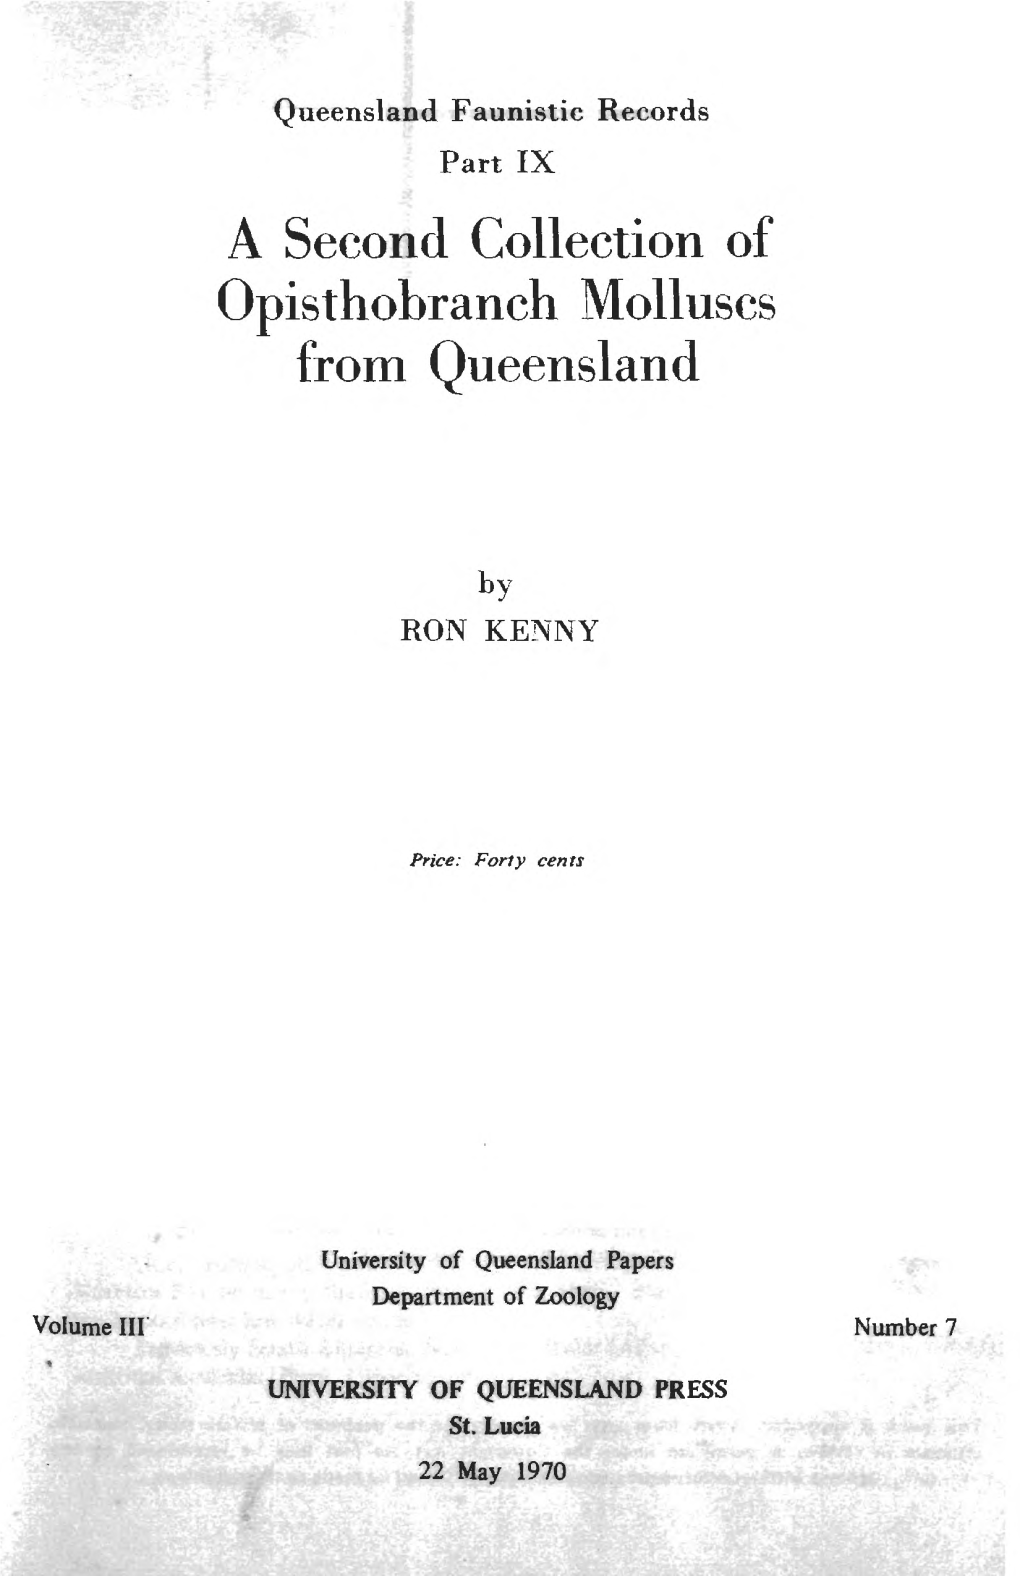 A Second Collection of Opisthobranch Molluscs from Queensland